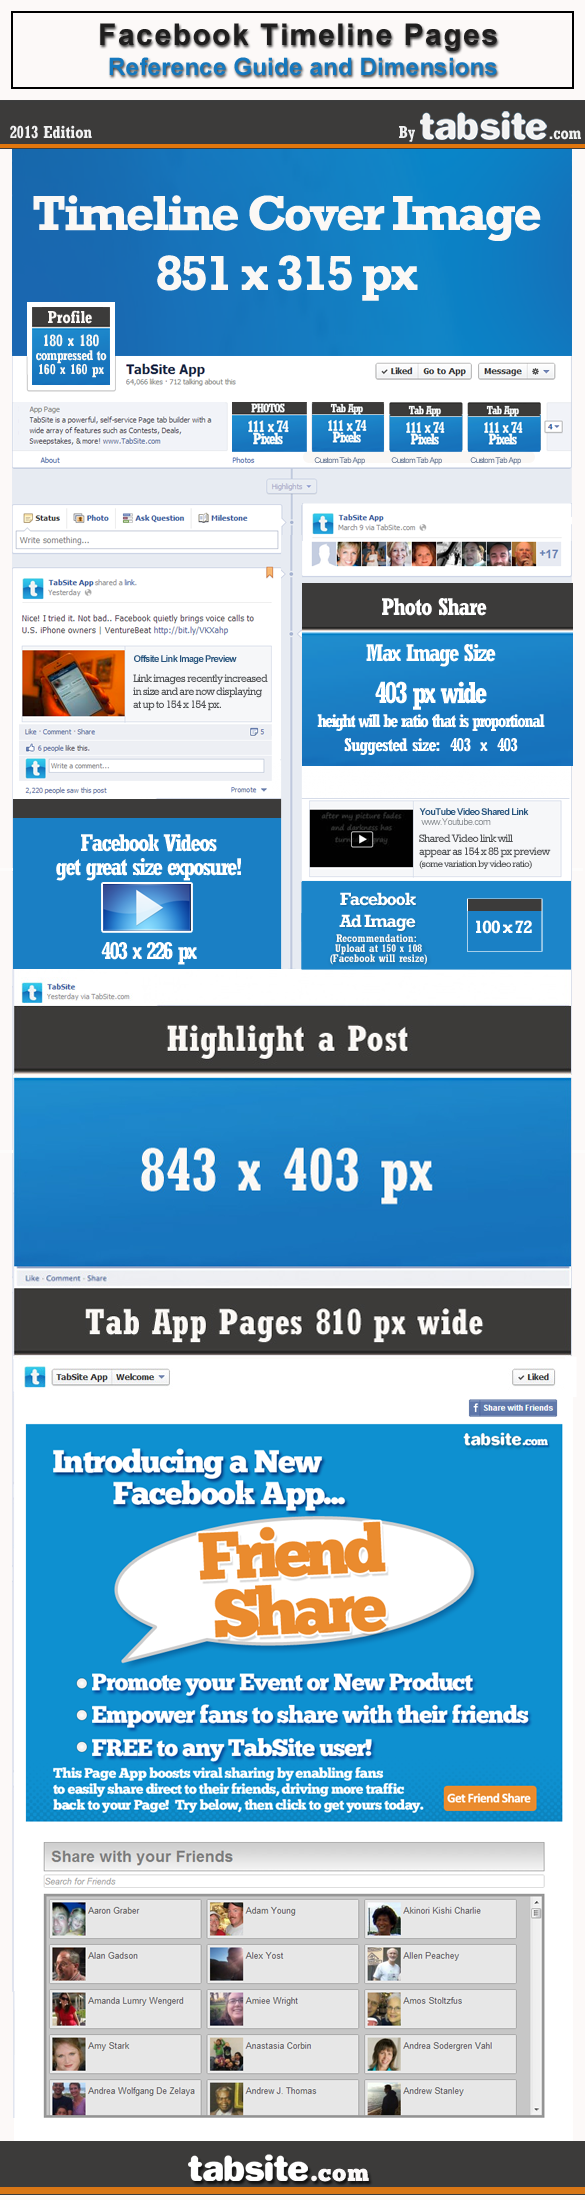 Facebook Pages Timeline Infographic - 2013 Edition by TabSite